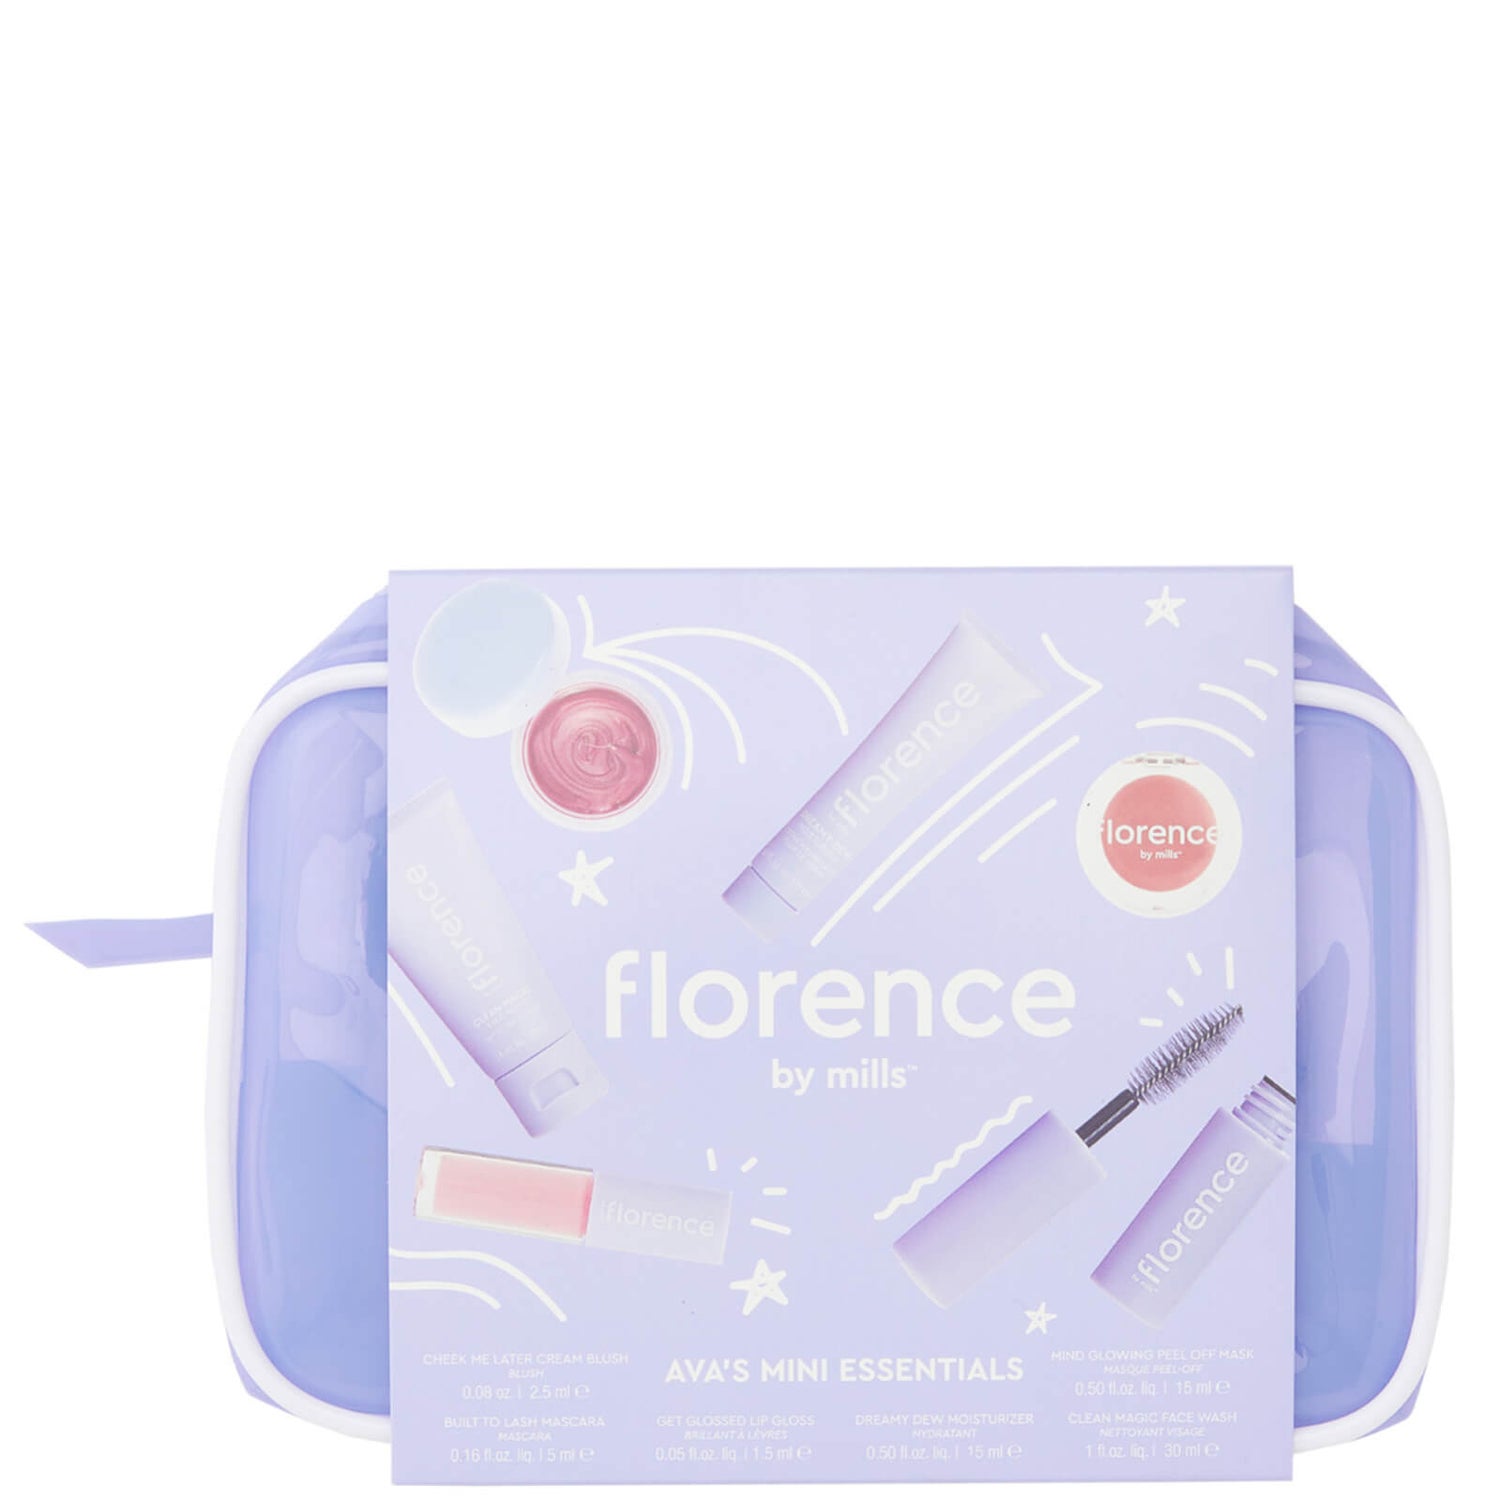 Florence by mills essential kit